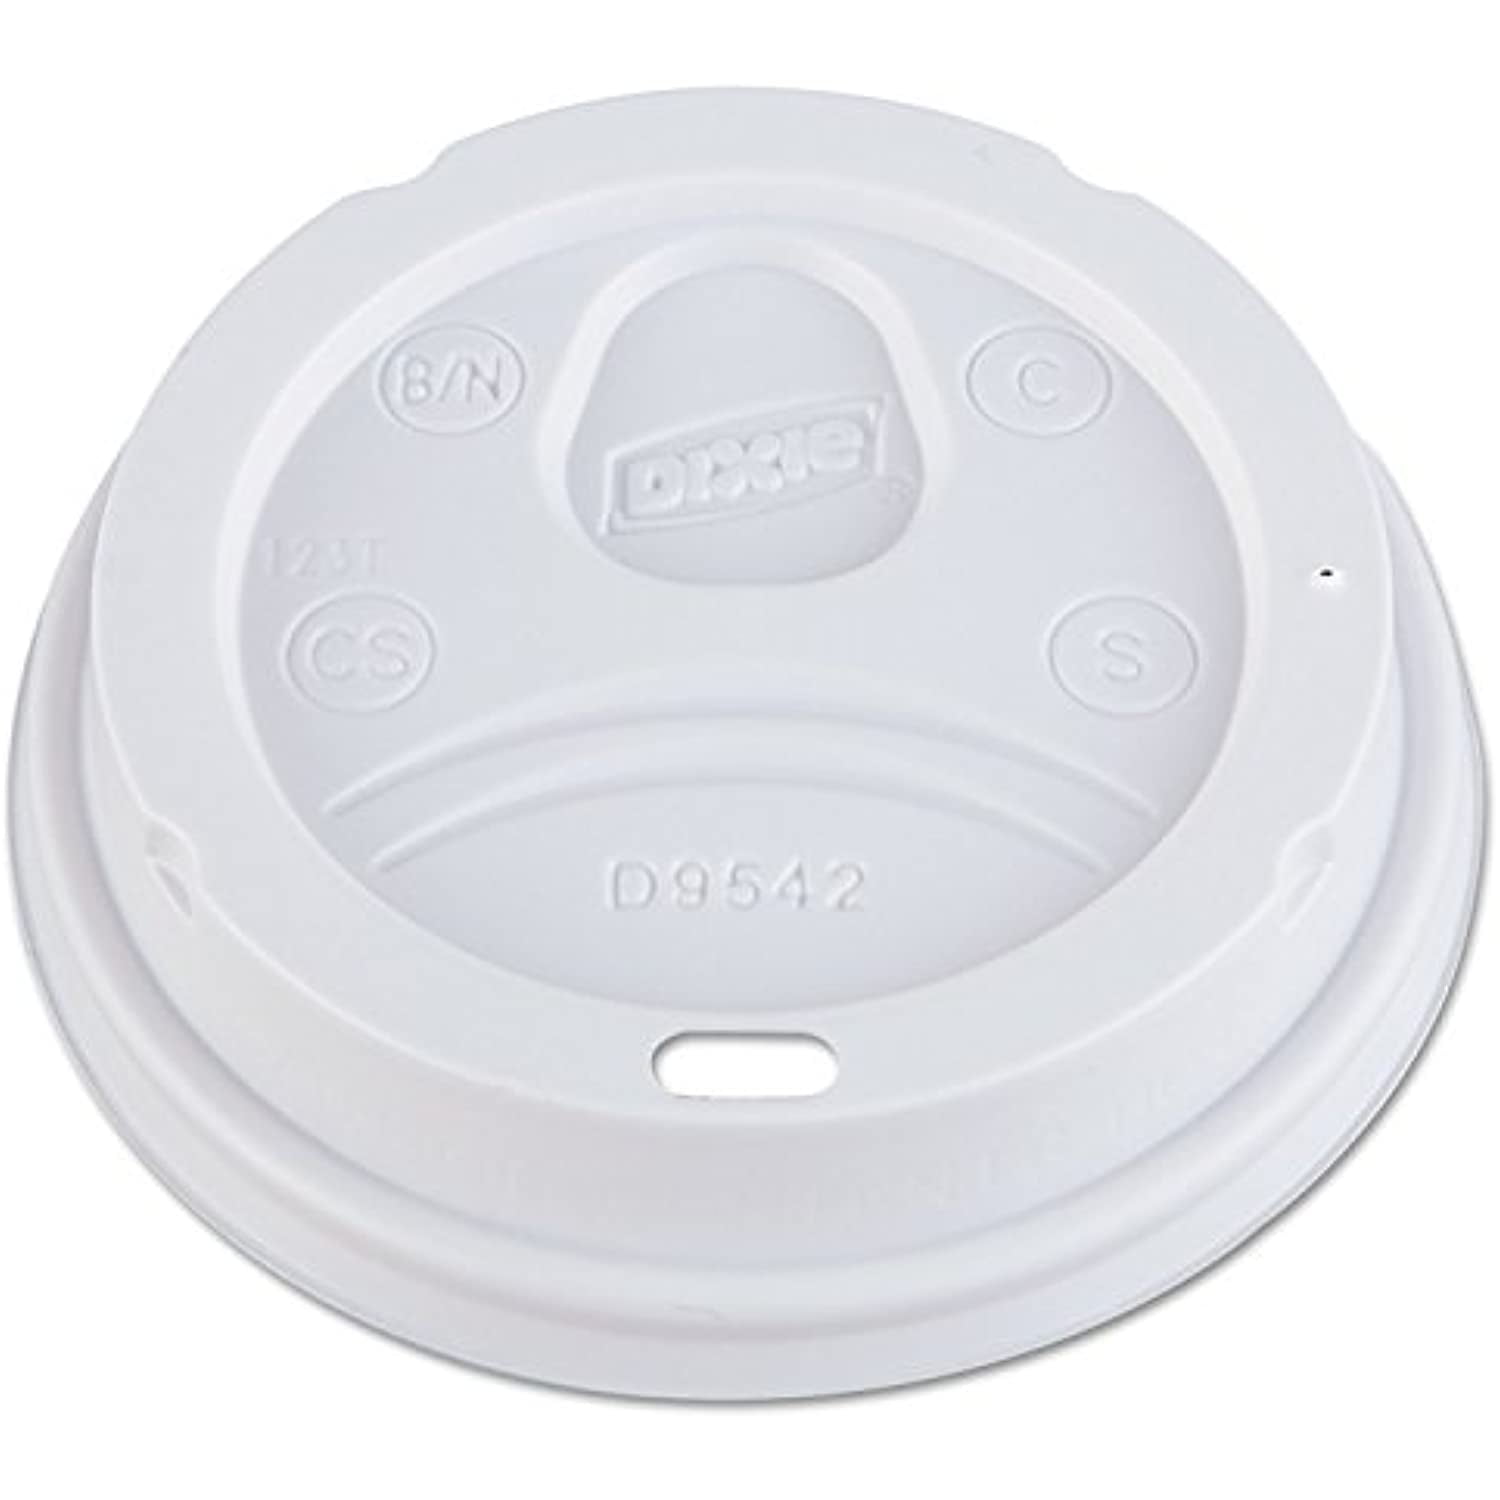 Aspire 6 Pcs Silicone Drinking Lid Cup Lids, Reusable Coffee Cup Covers / Lids - Assorted, Size: One Size